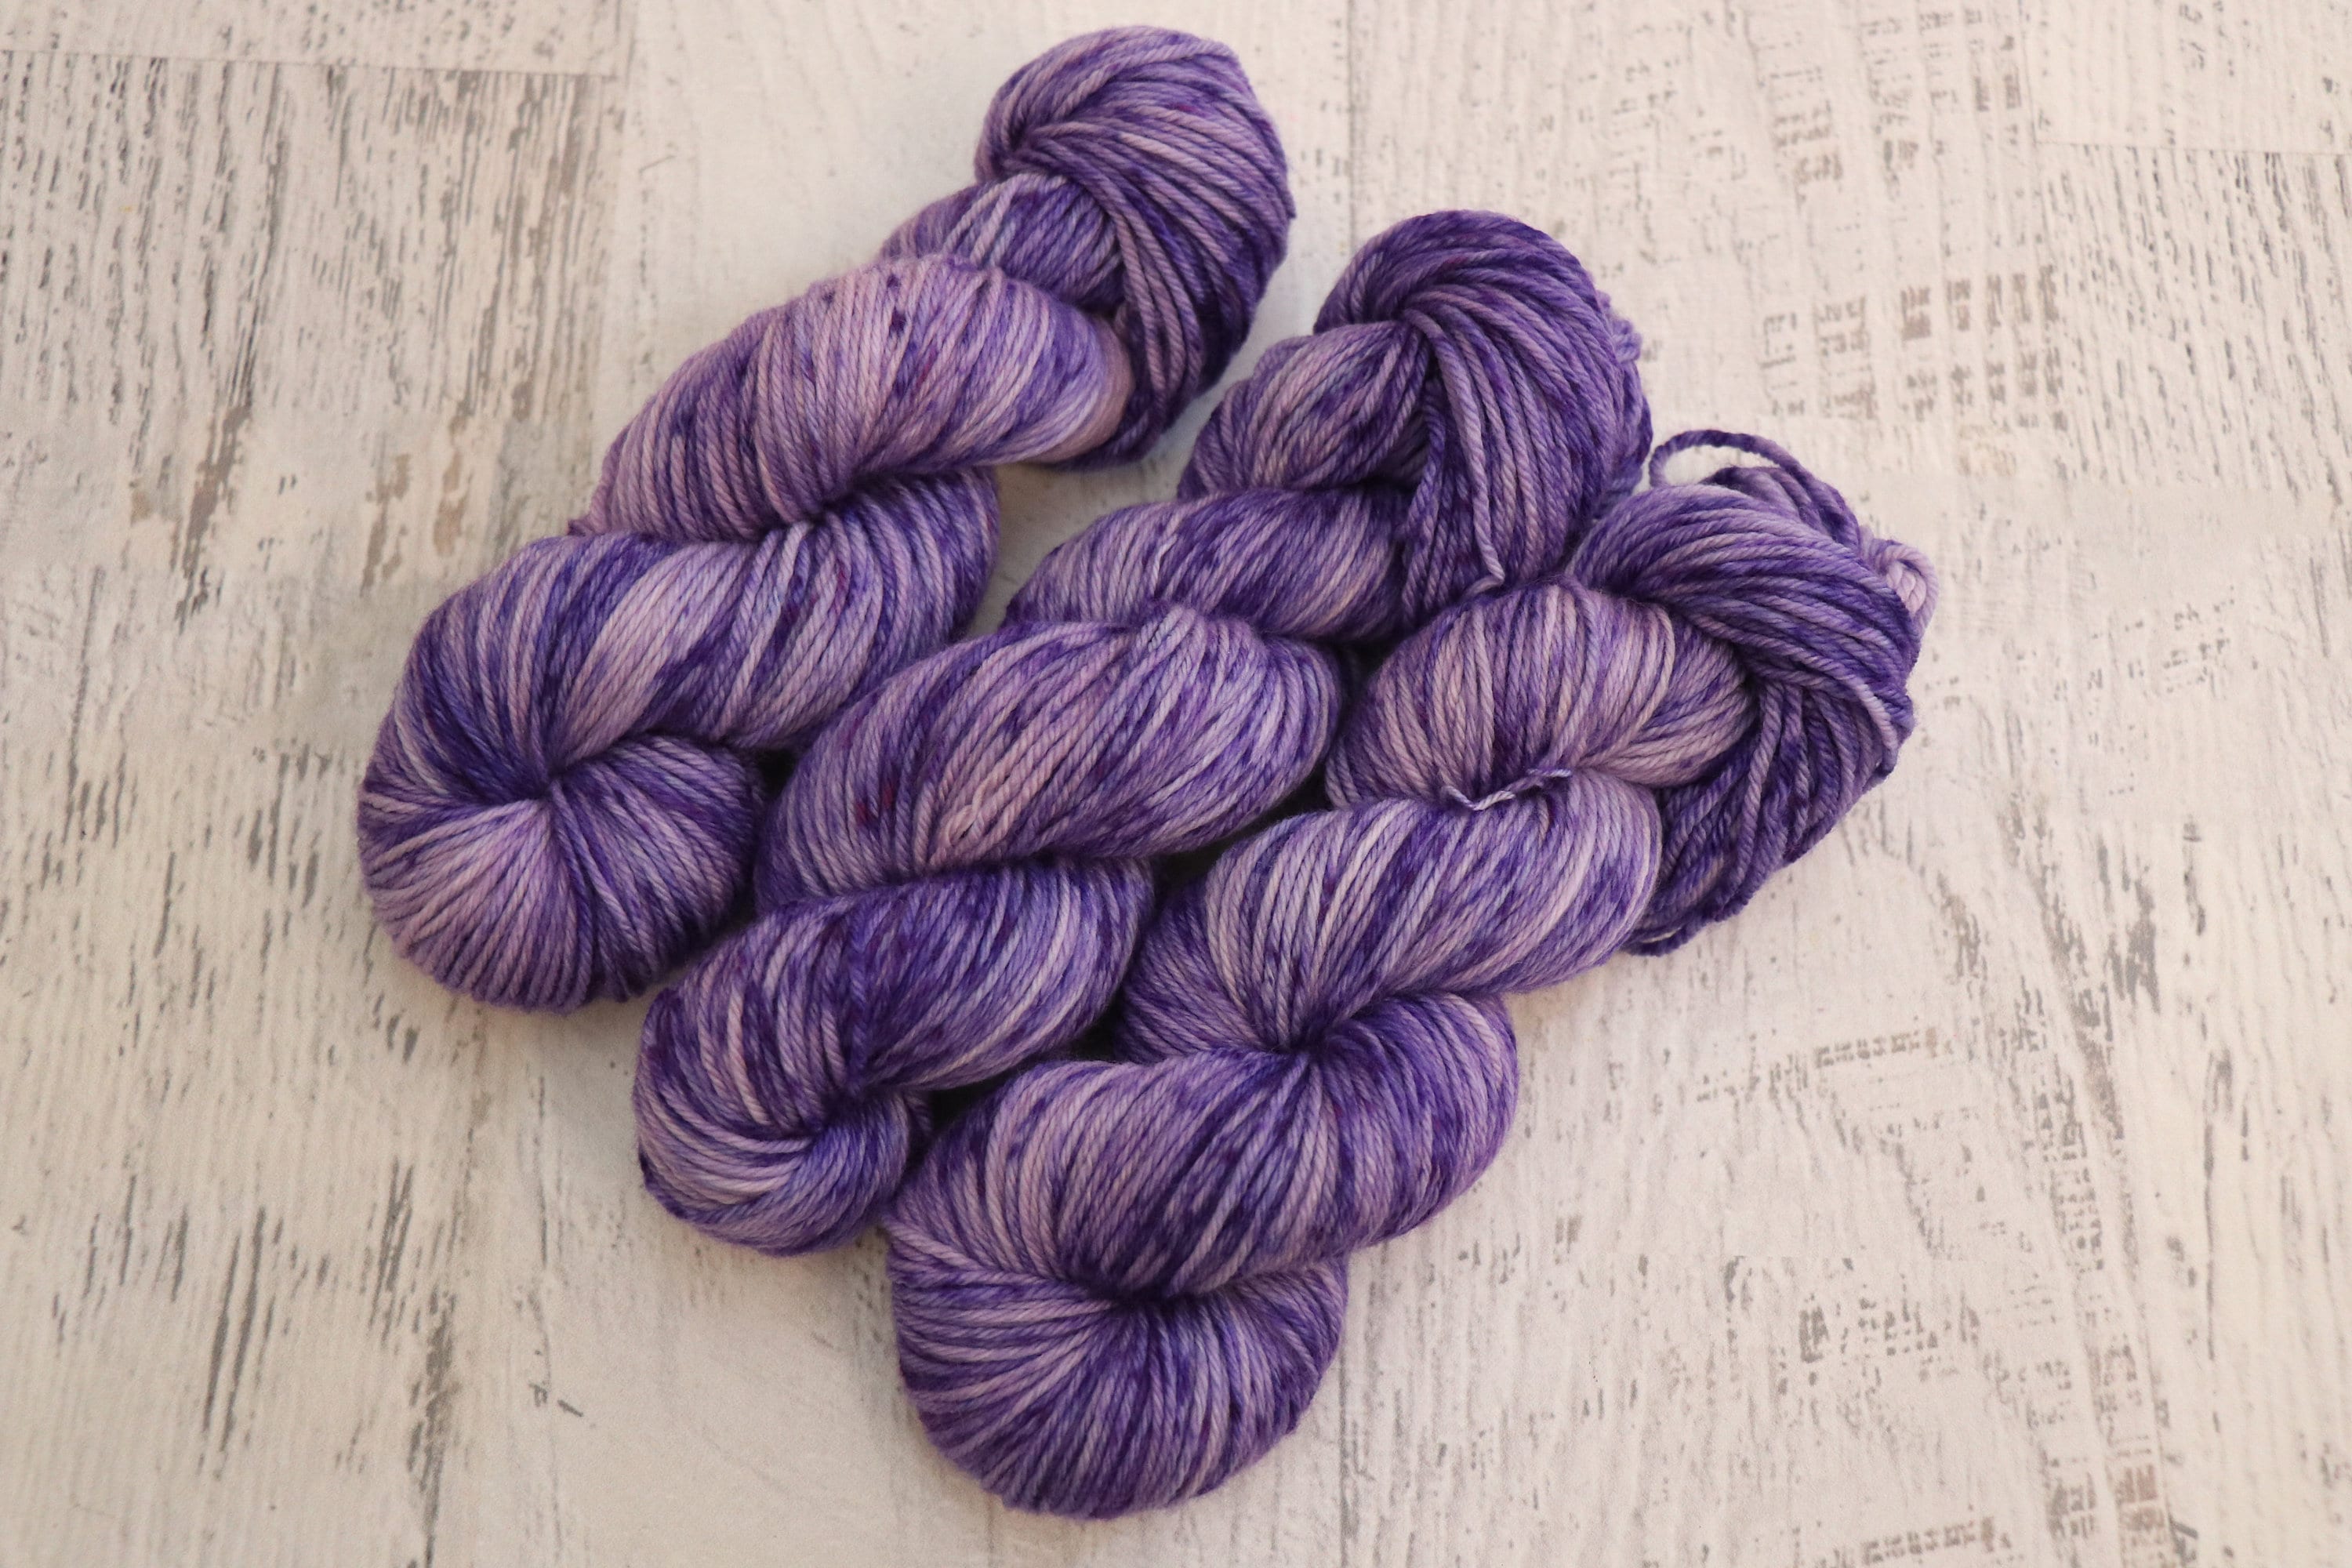 ChemKnits: Dyeing Speckled Yarn with Wilton's Violet Food Coloring